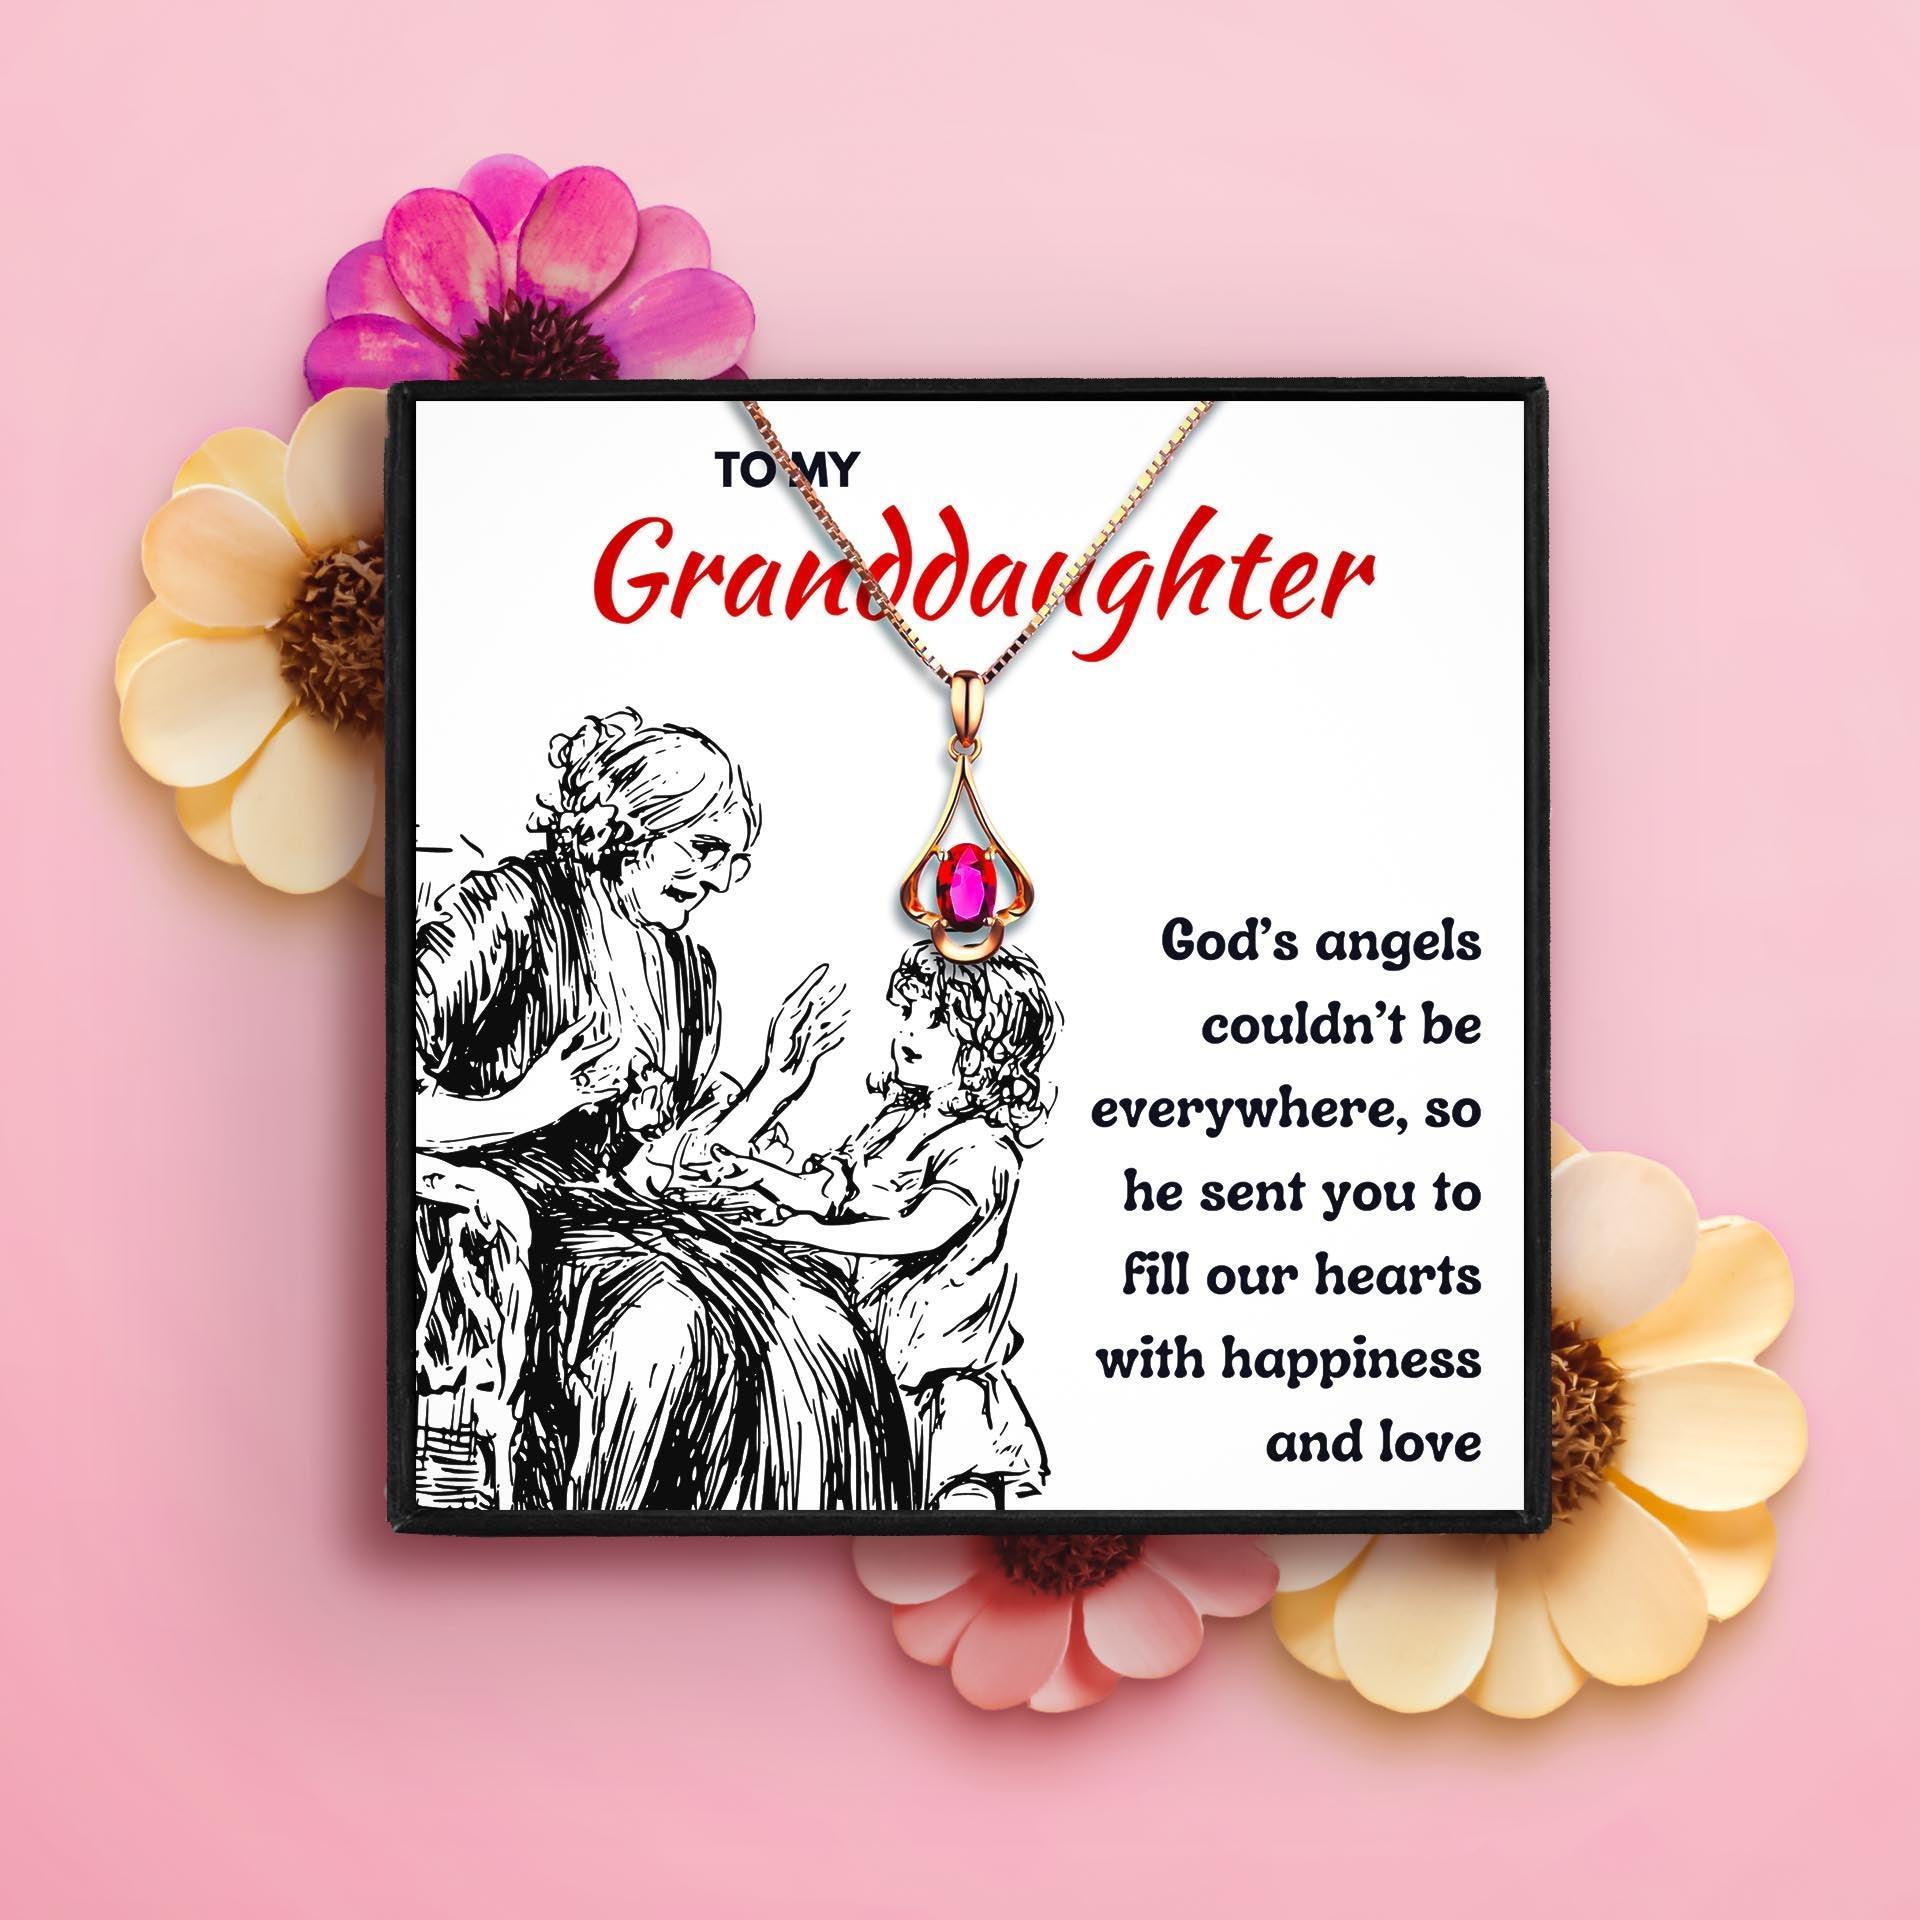 Gifts for Granddaughter That They'll Extremely Want in 2023 | Gifts for Granddaughter That They'll Extremely Want - undefined | granddaughter gift, granddaughter gifts from nana, Granddaughter Necklace, great granddaughter gifts, jewelry for granddaughter from grandmother | From Hunny Life | hunnylife.com